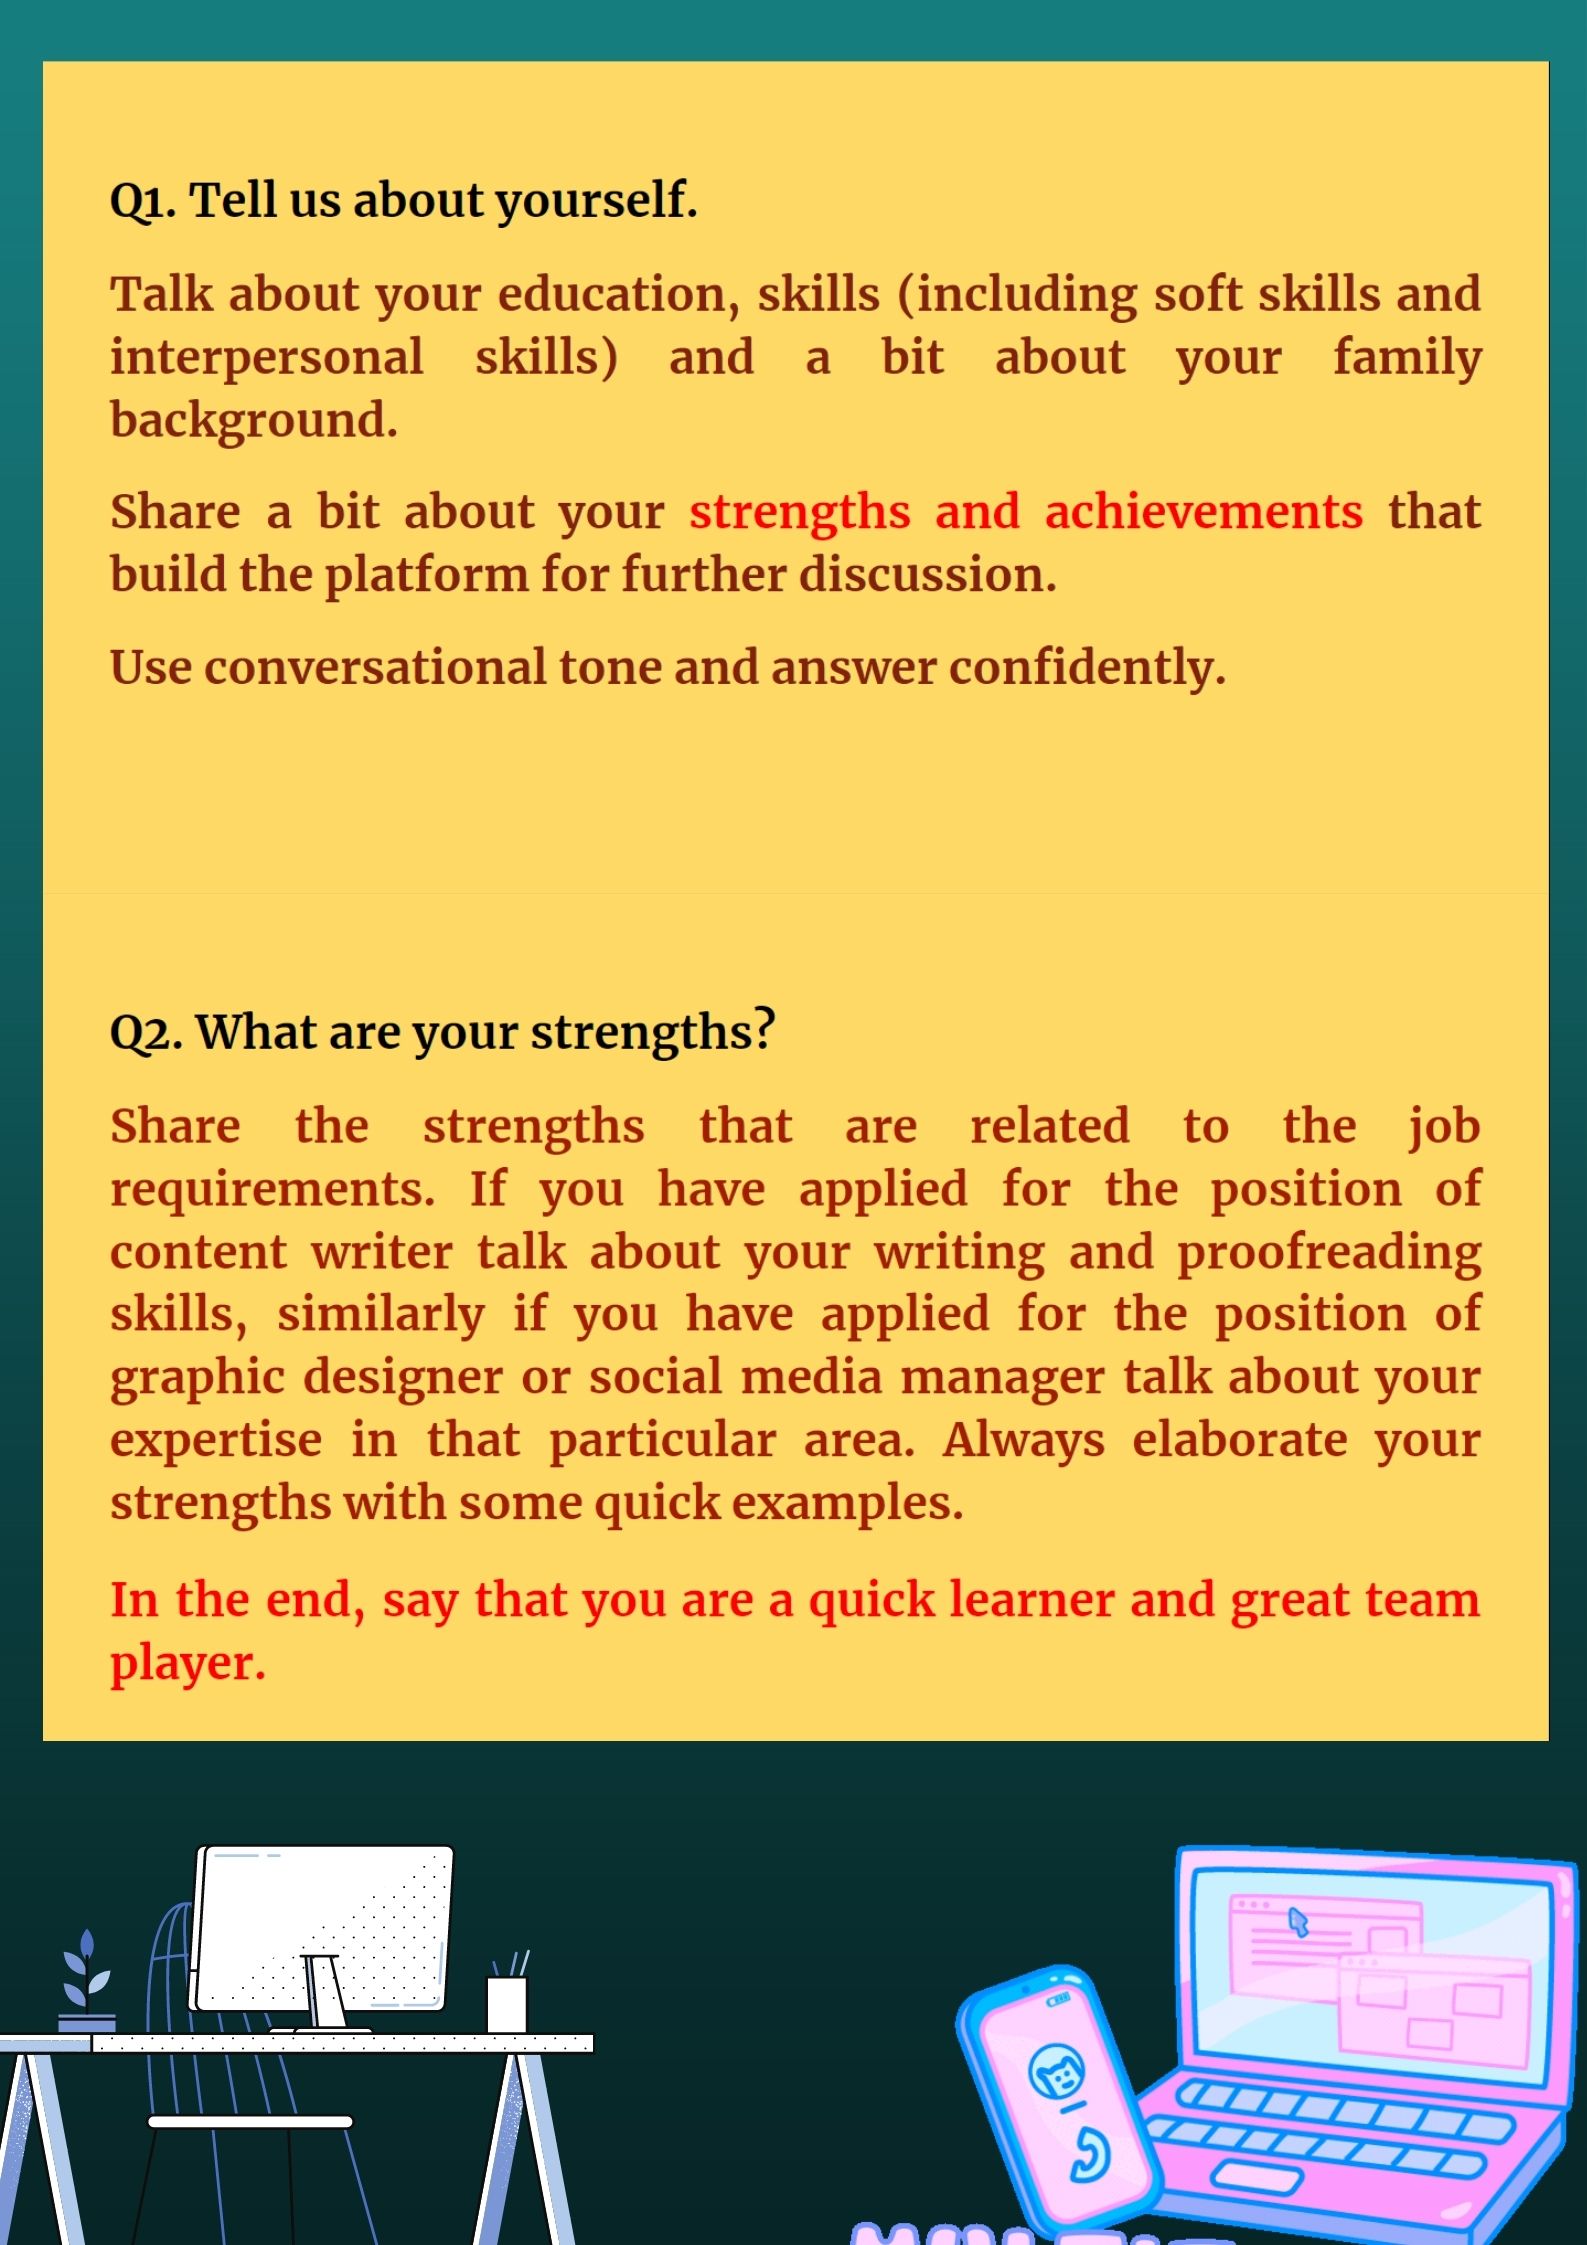 Interview questions and answers